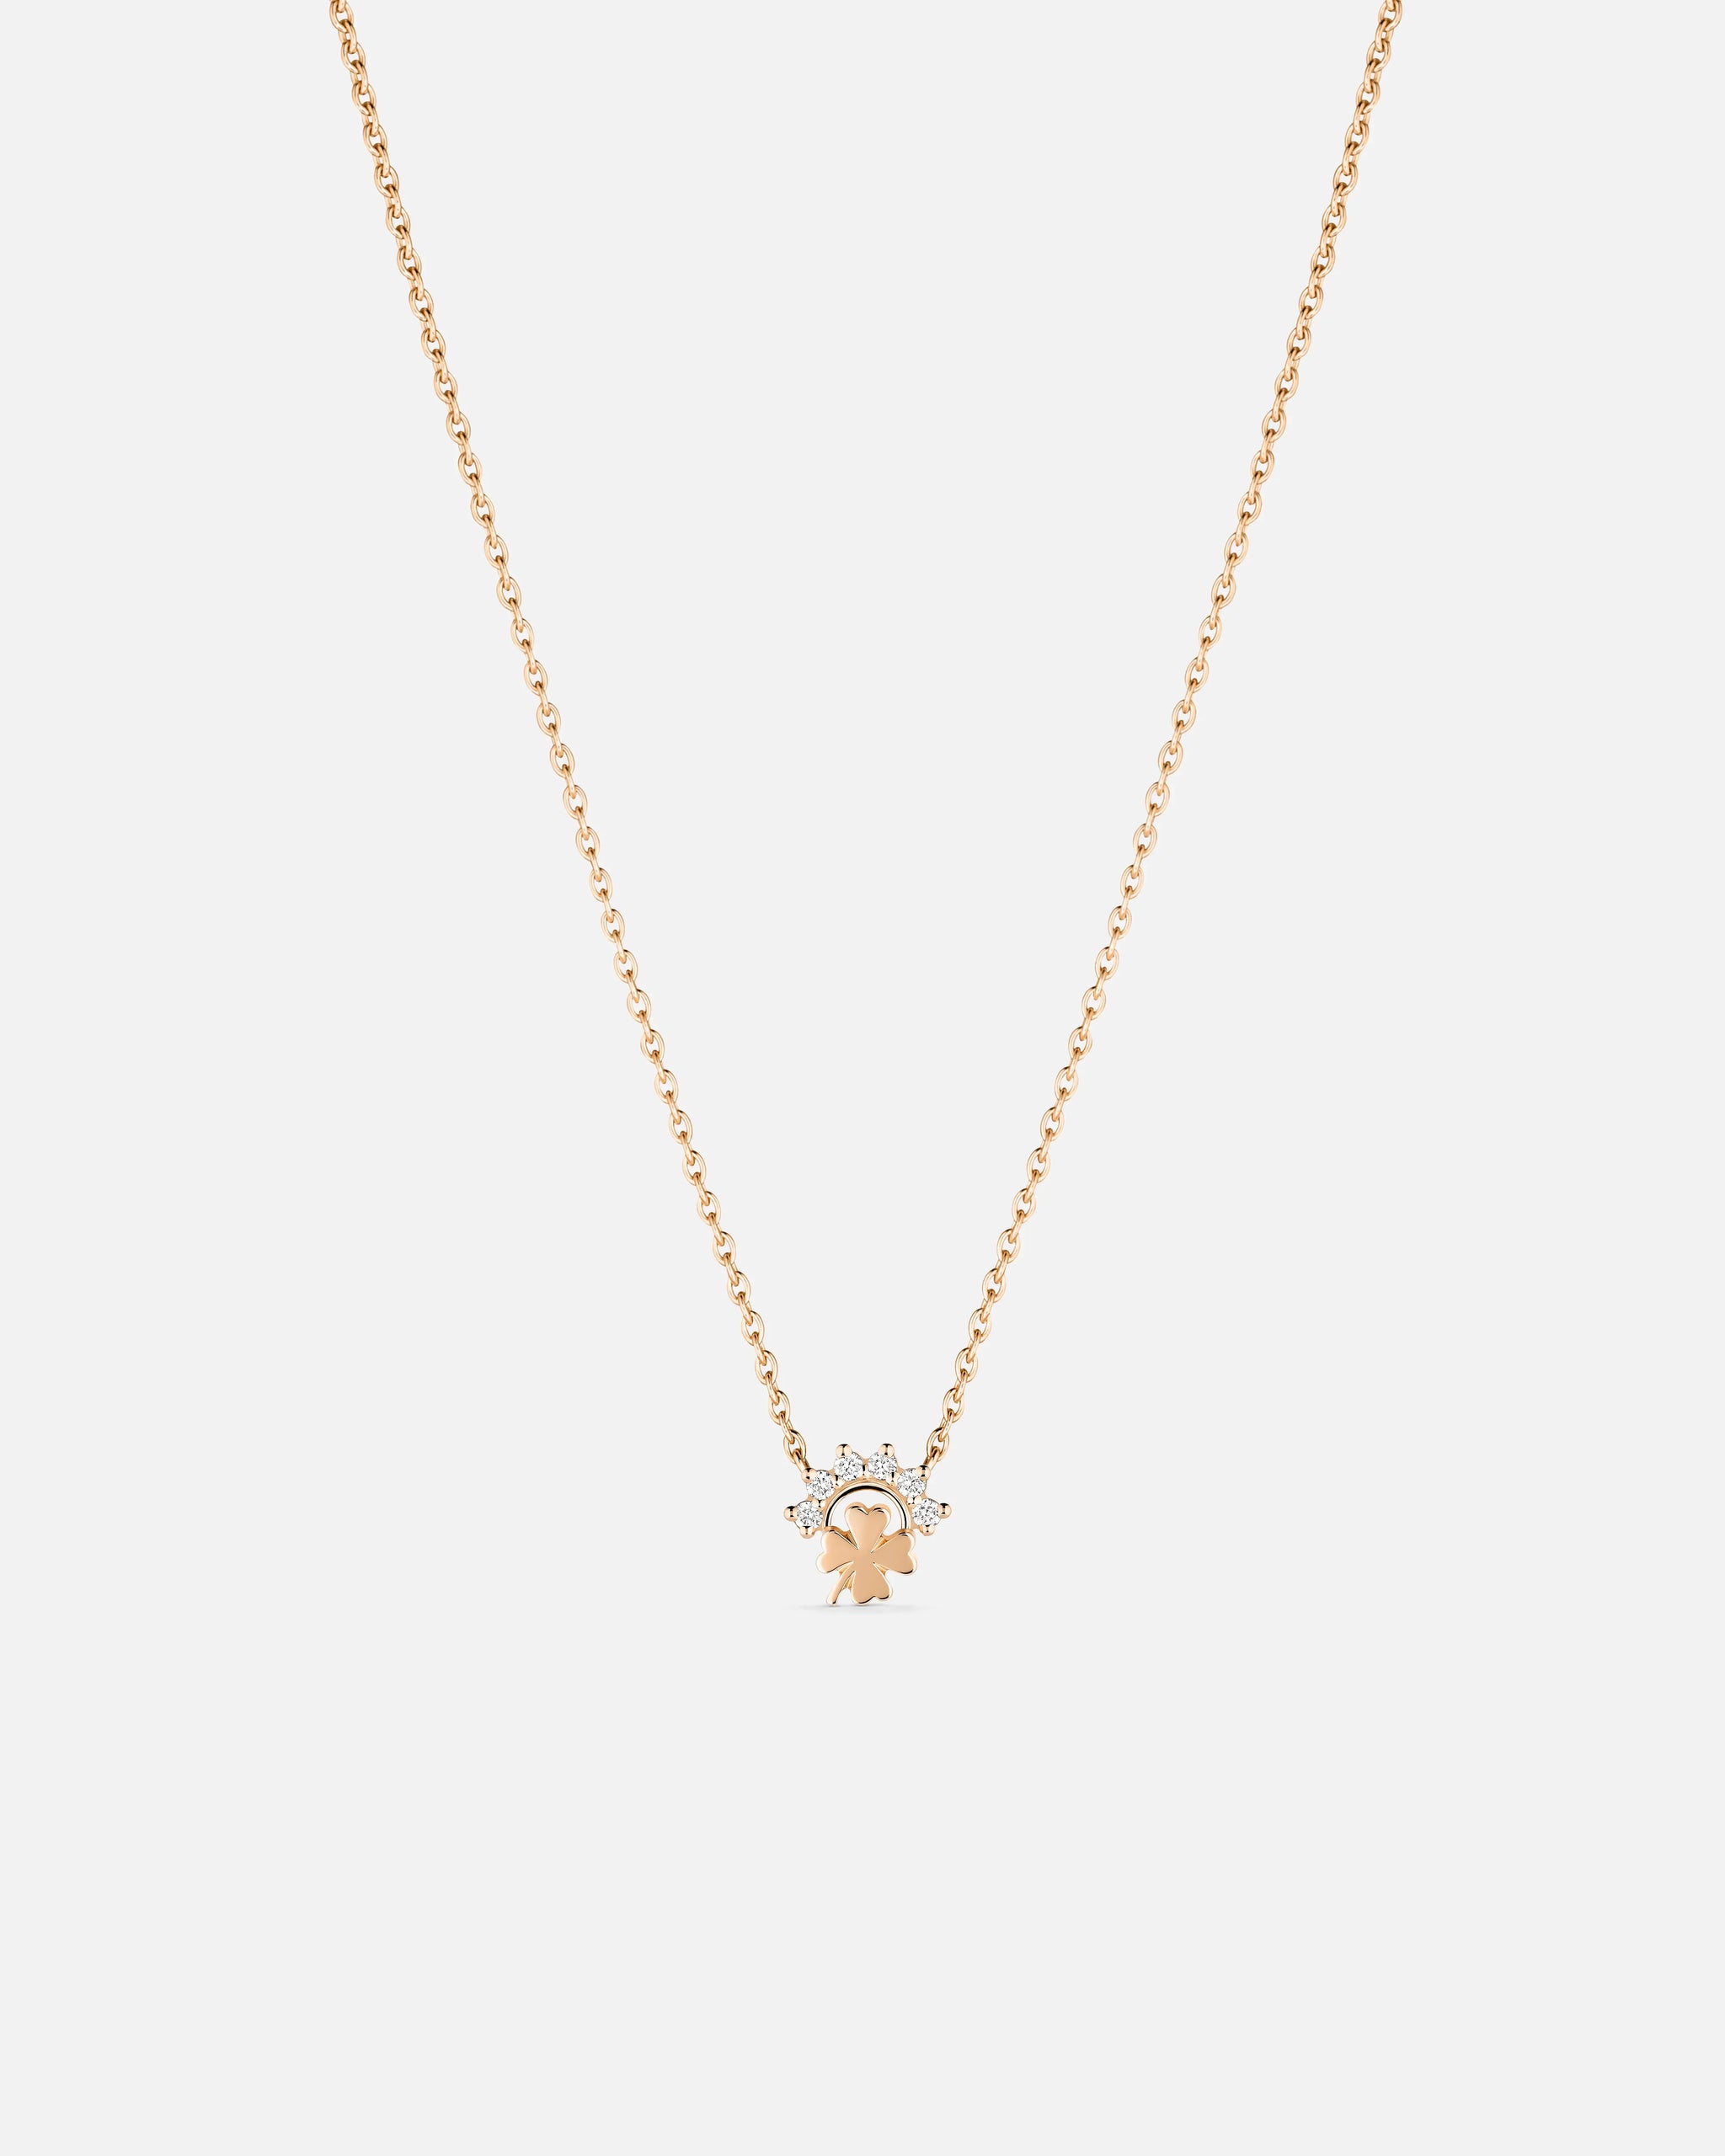 Small Luck Pendant in Rose Gold - 1 - Nouvel Heritage